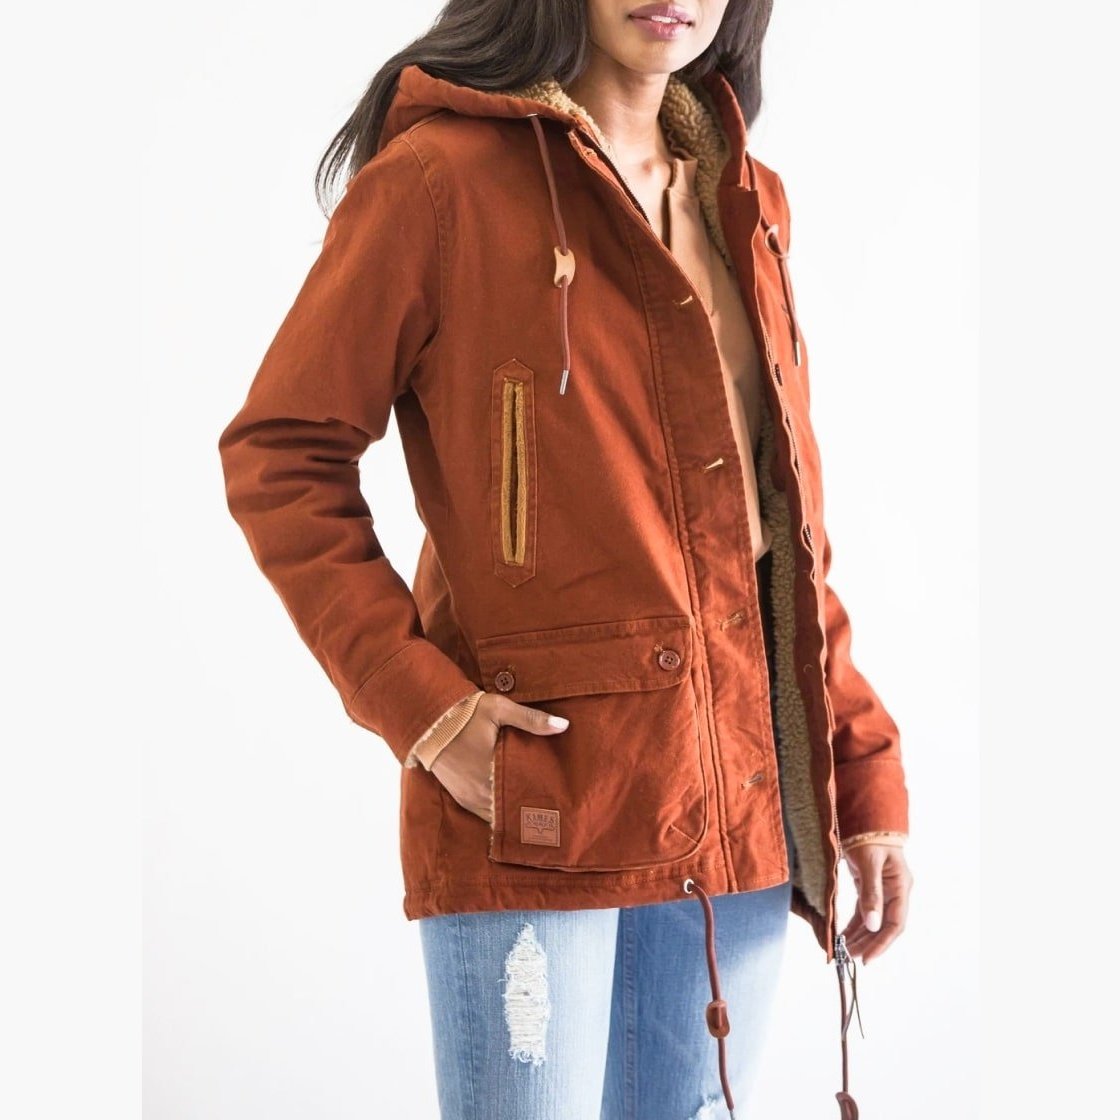 Kimes Ranch Women's Jacket Anorak Cool Weather Black or Rust - Kimes Ranch